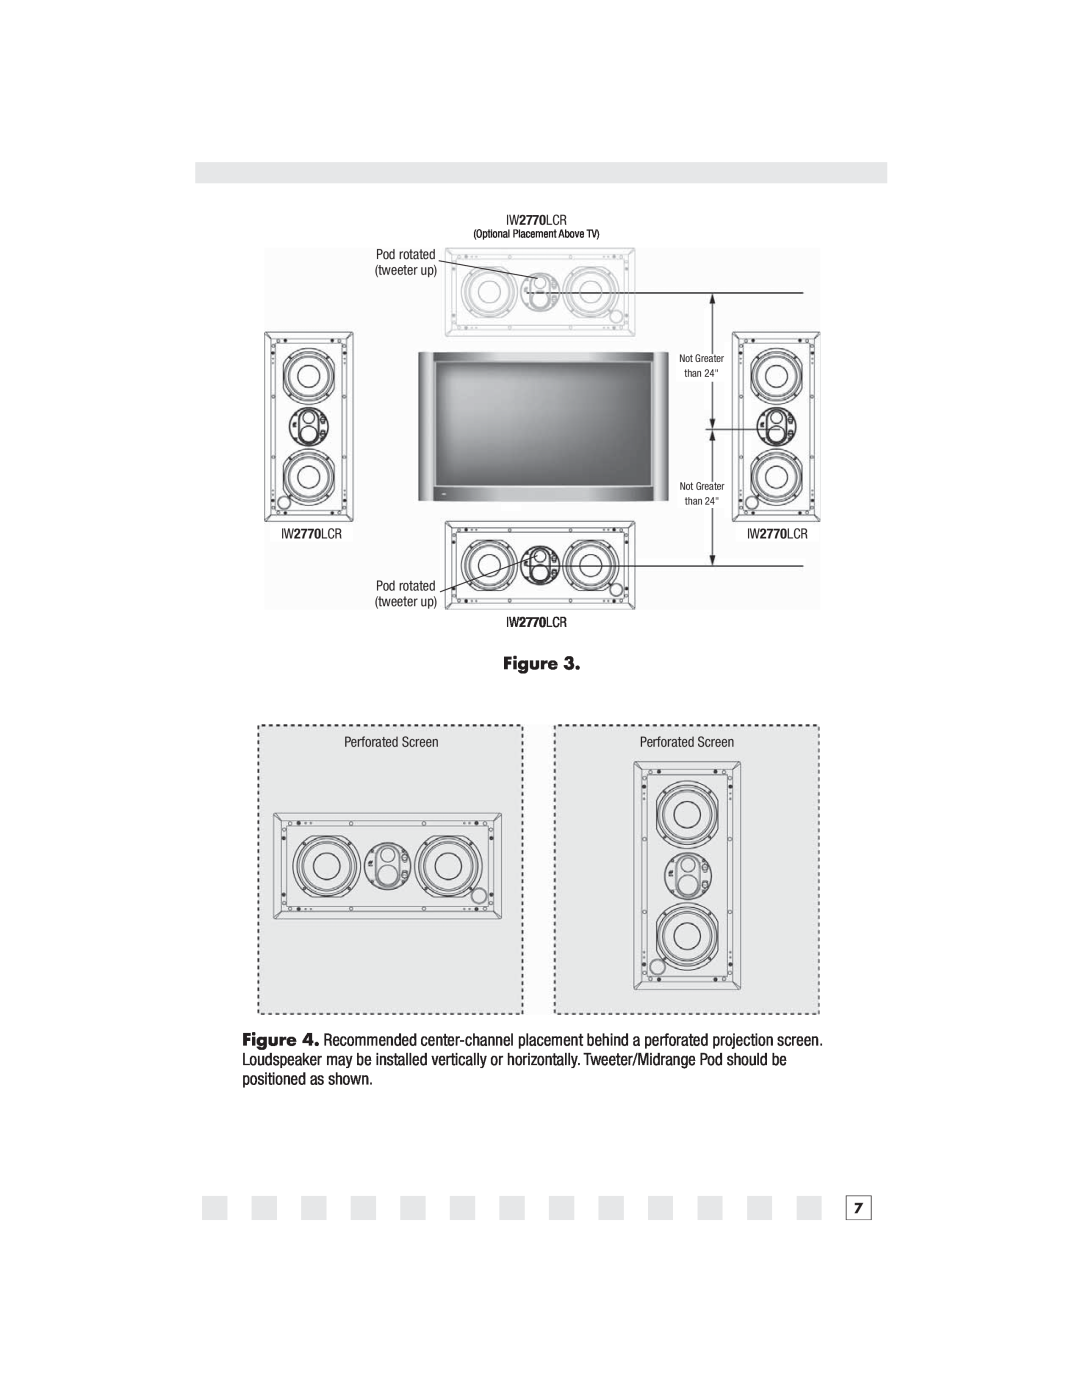 Niles Audio IW2650LCR manual IW2770LCR, Perforated Screen, Optional Placement Above TV, Not Greater than Not Greater than 